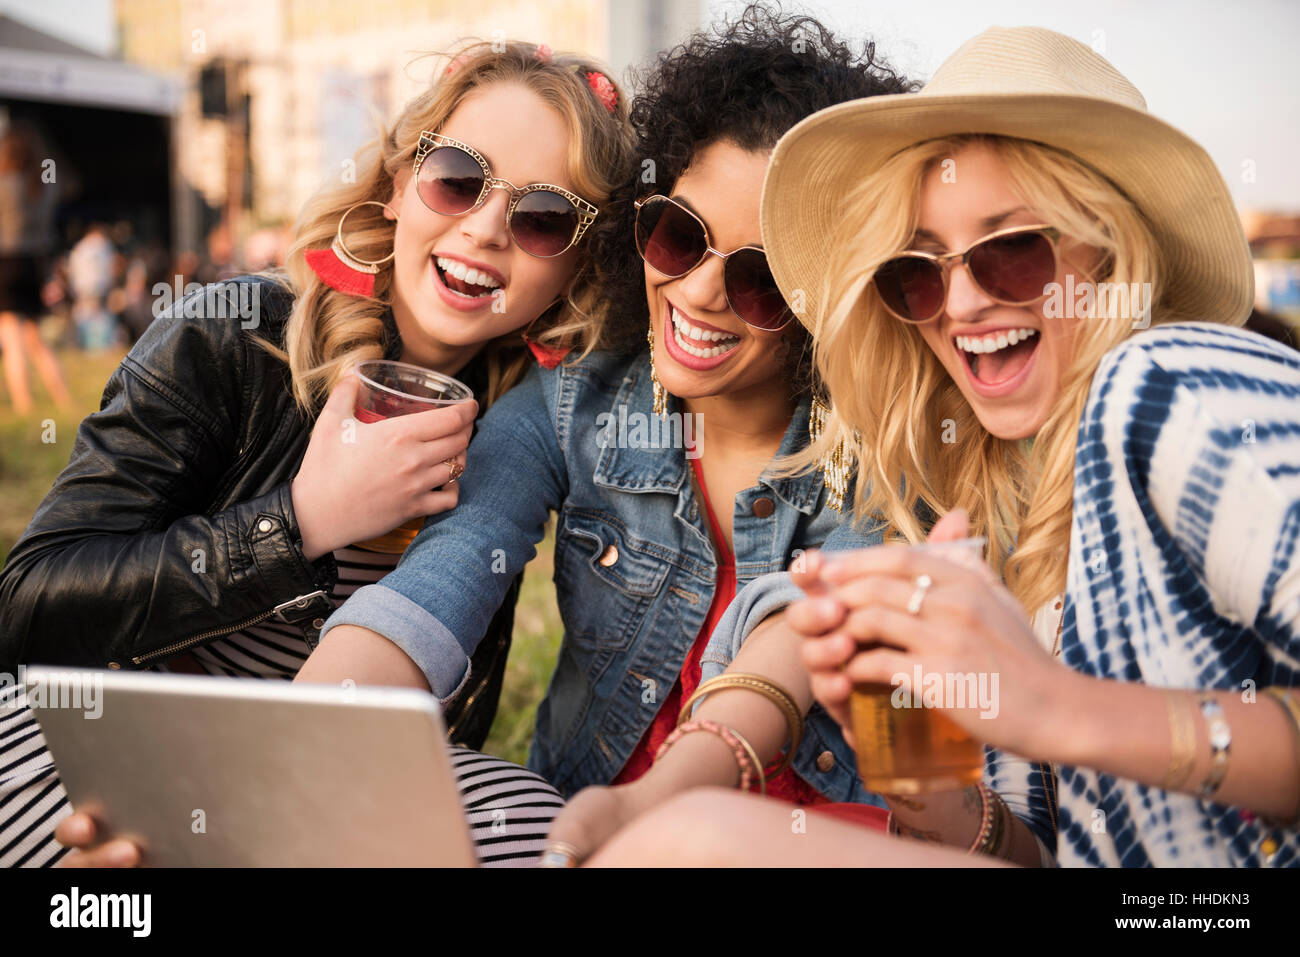 Selfie with the most important people Stock Photo - Alamy